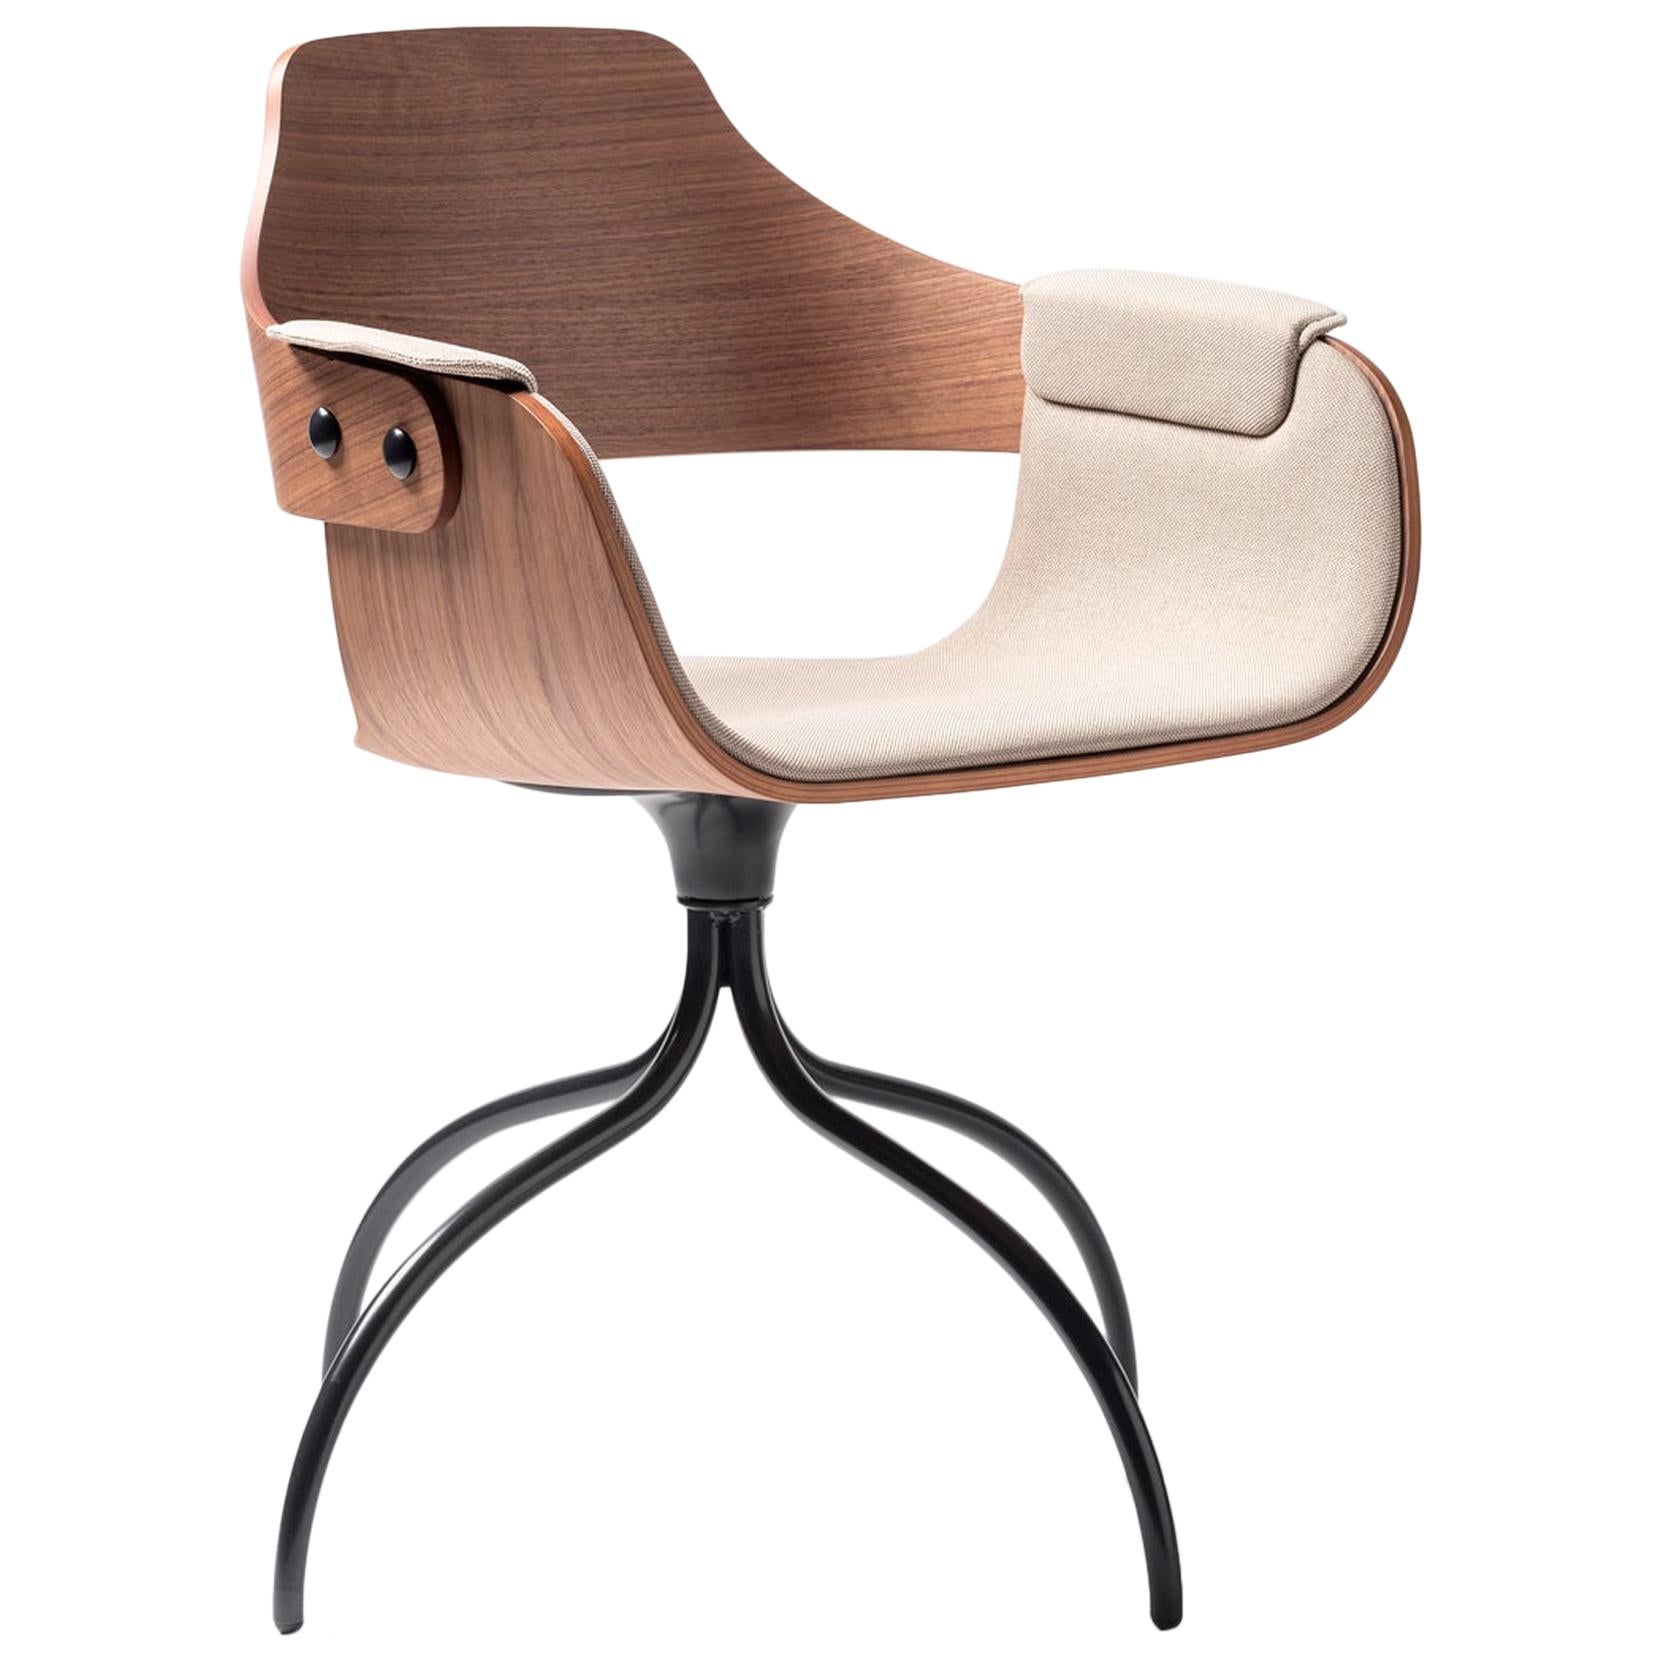 Swivel walnut desk chair upholstered in fabric by Jaime Hayon